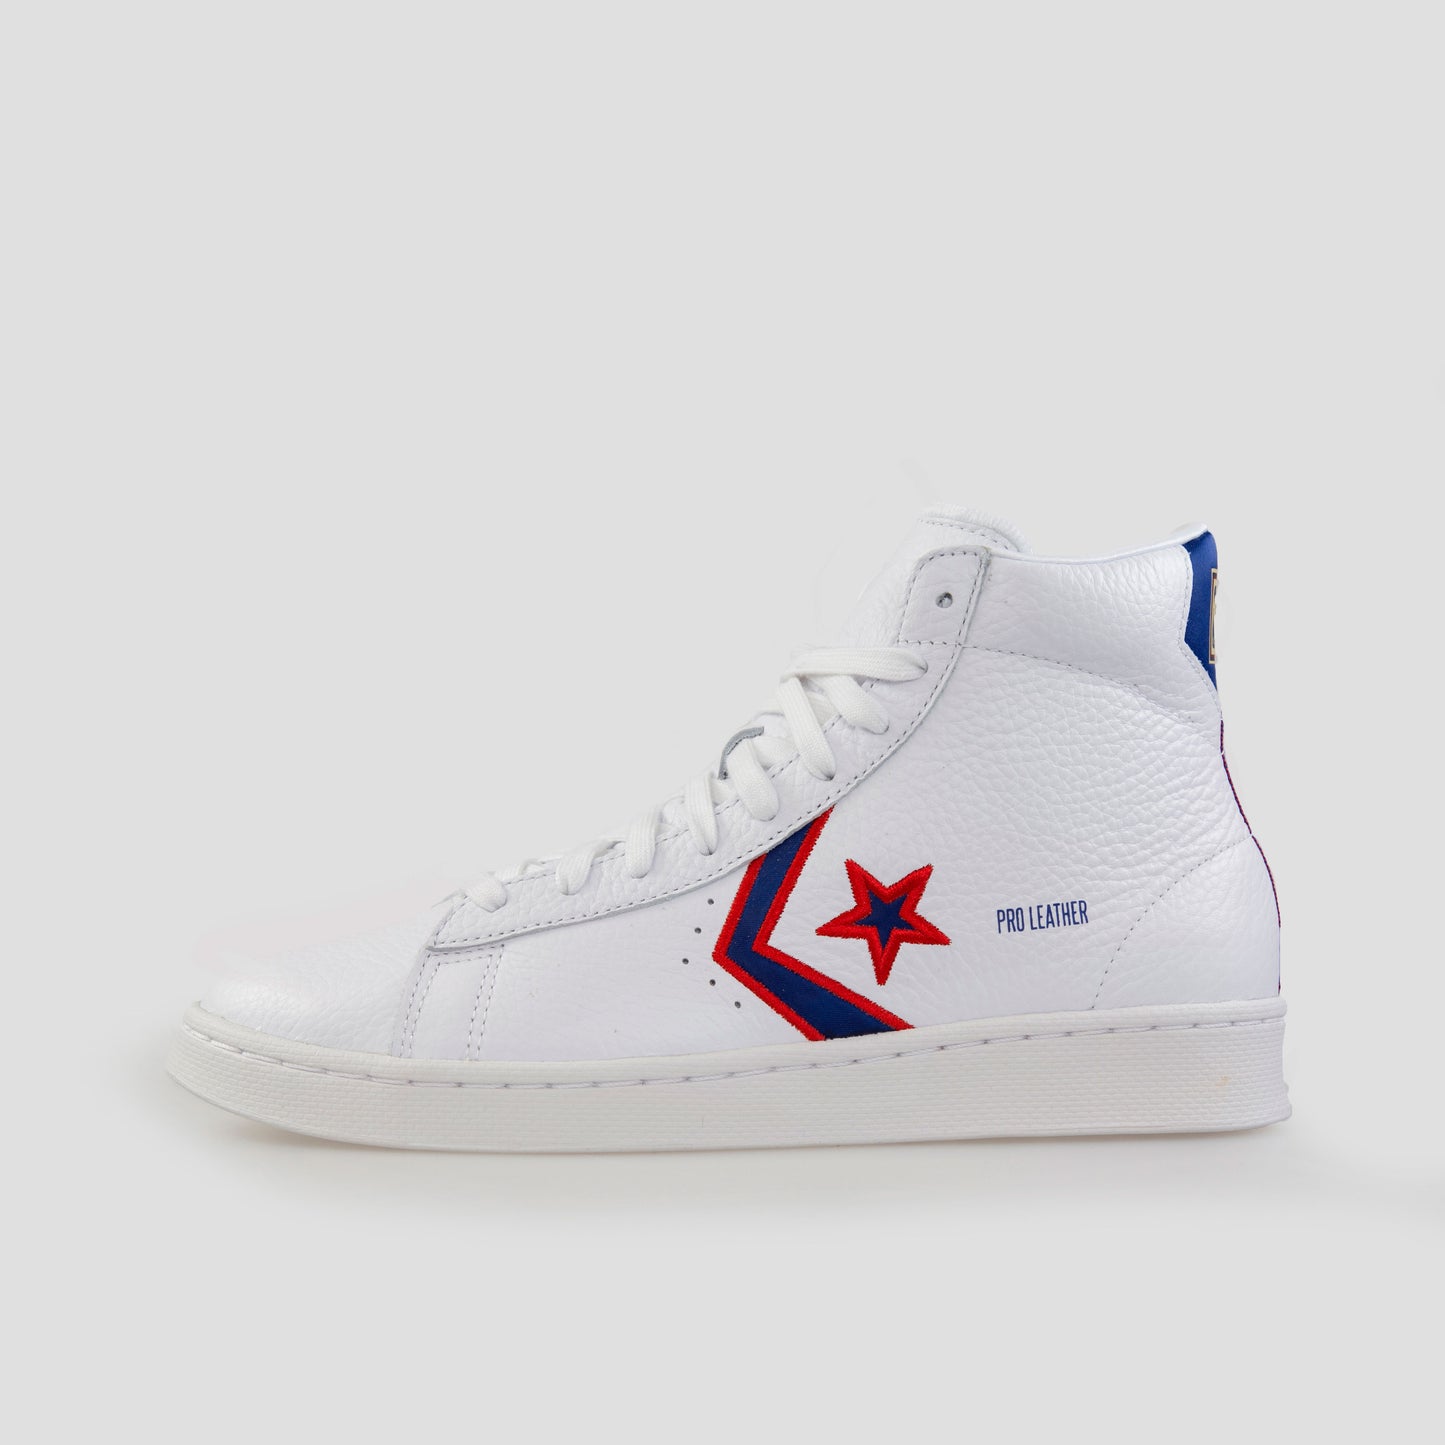 Converse Breaking Down Barriers Pistons Pro Leather High Top - 167058C - Colección Chico